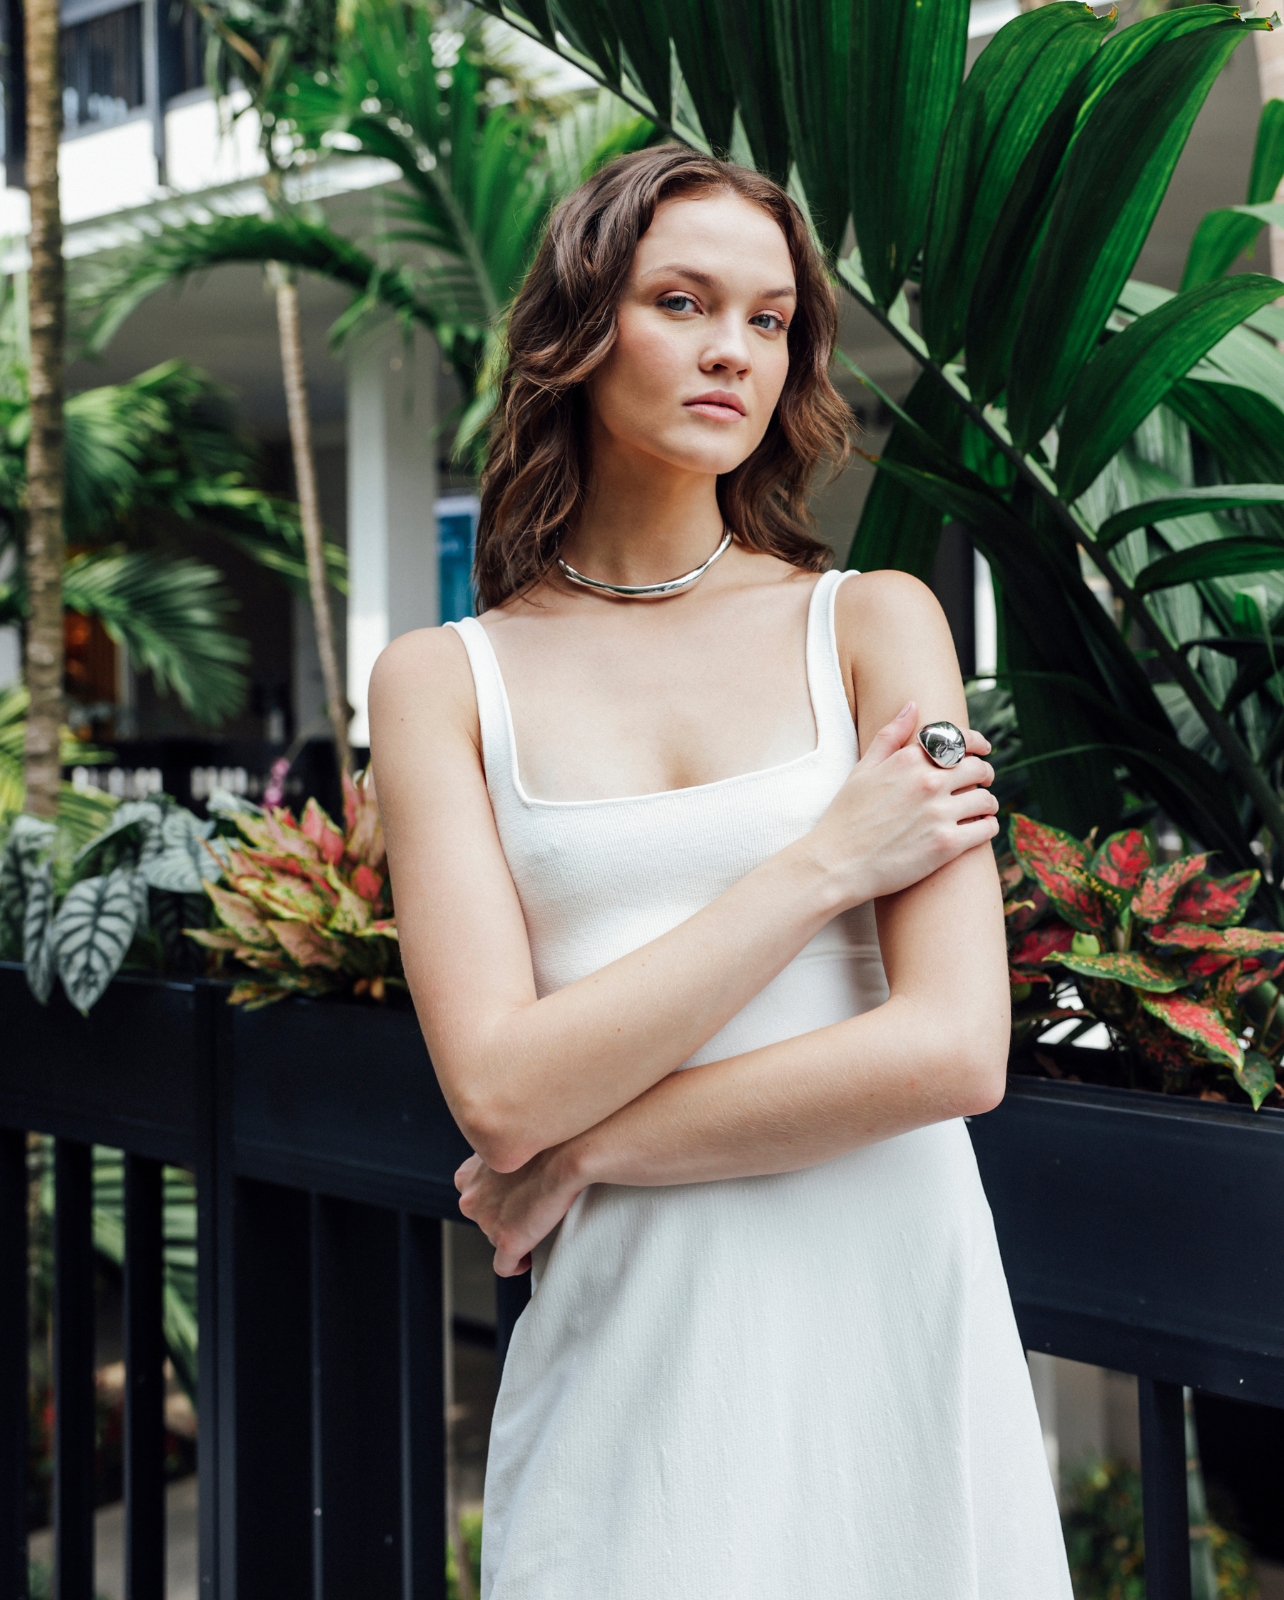 Model wearing Scanlan Theodore white crepe knit dress surrounded by greenery